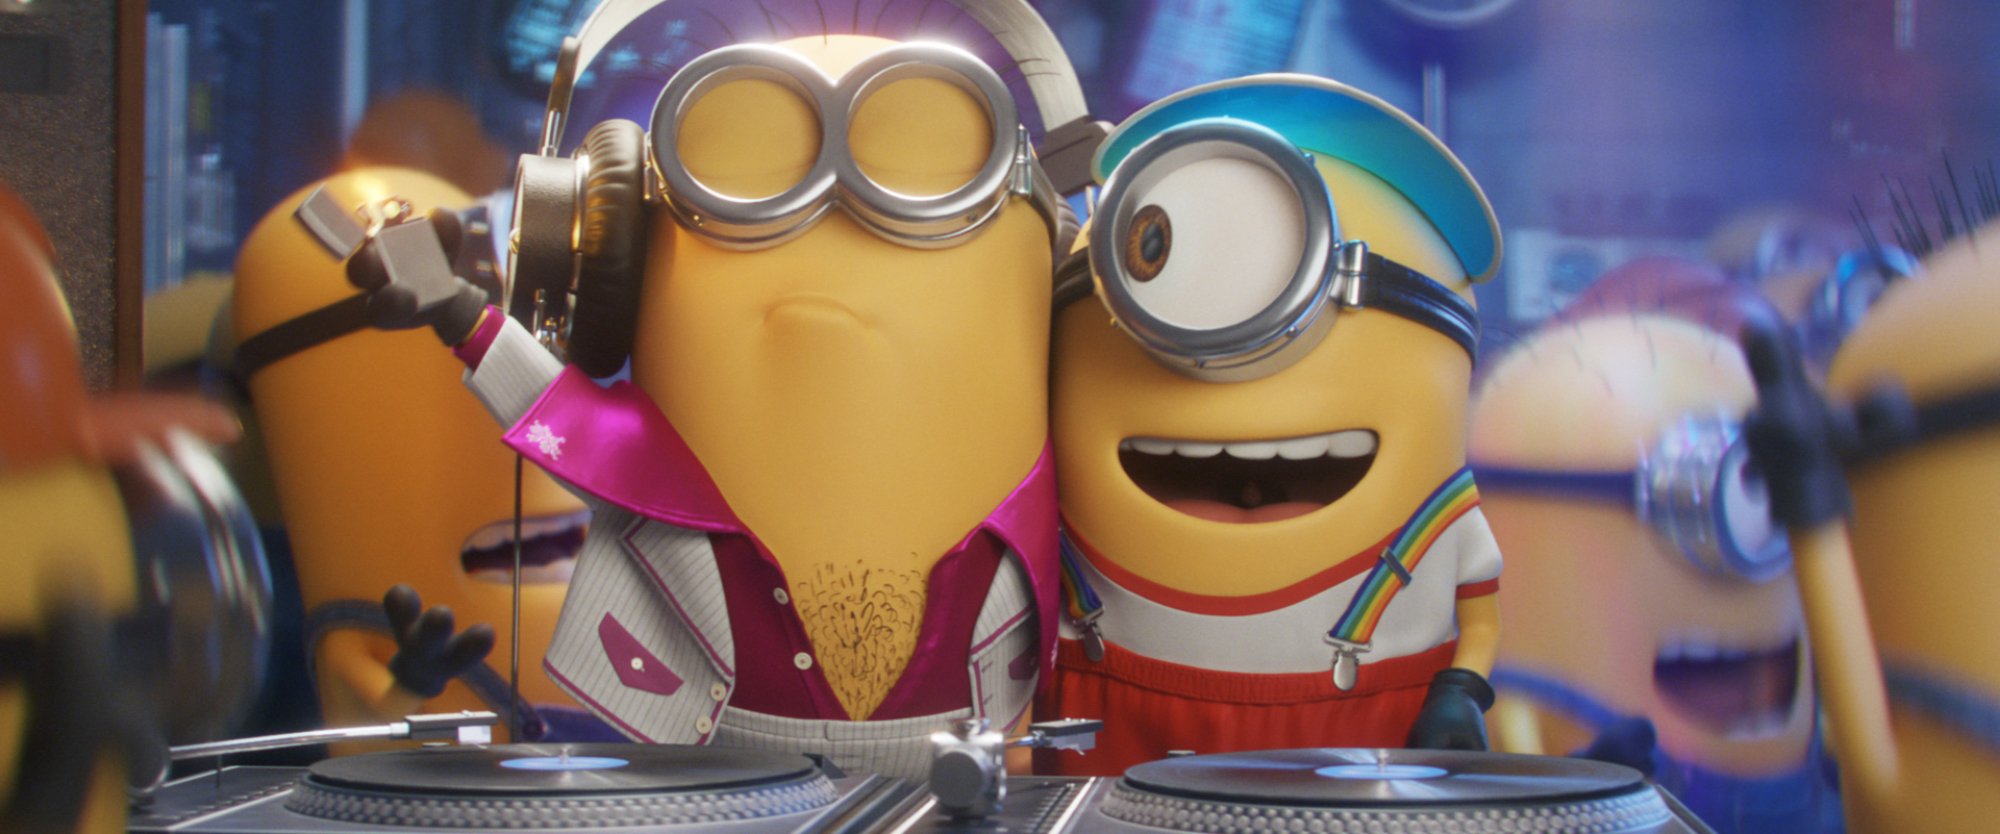 Where to Watch 'Minions: The Rise of Gru'